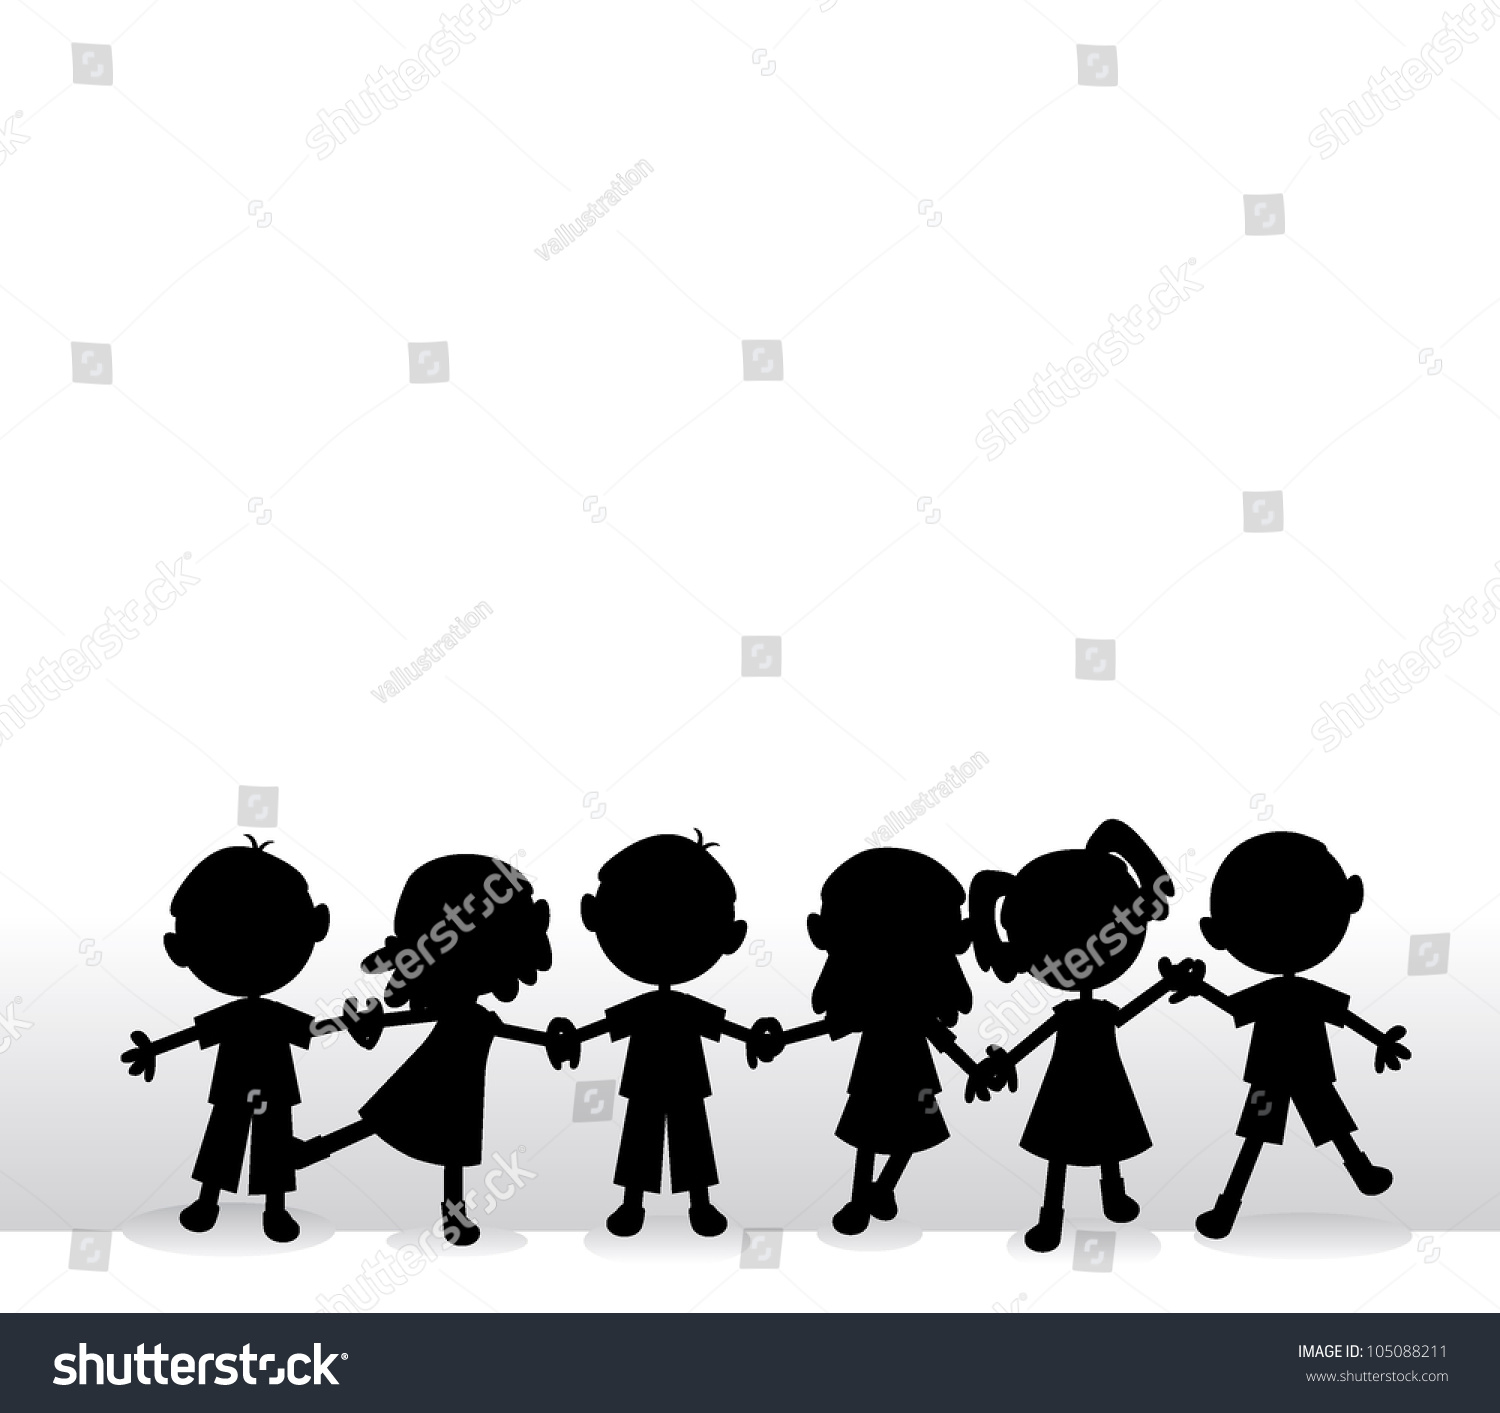 Silhouette Of Kids Holding Hands